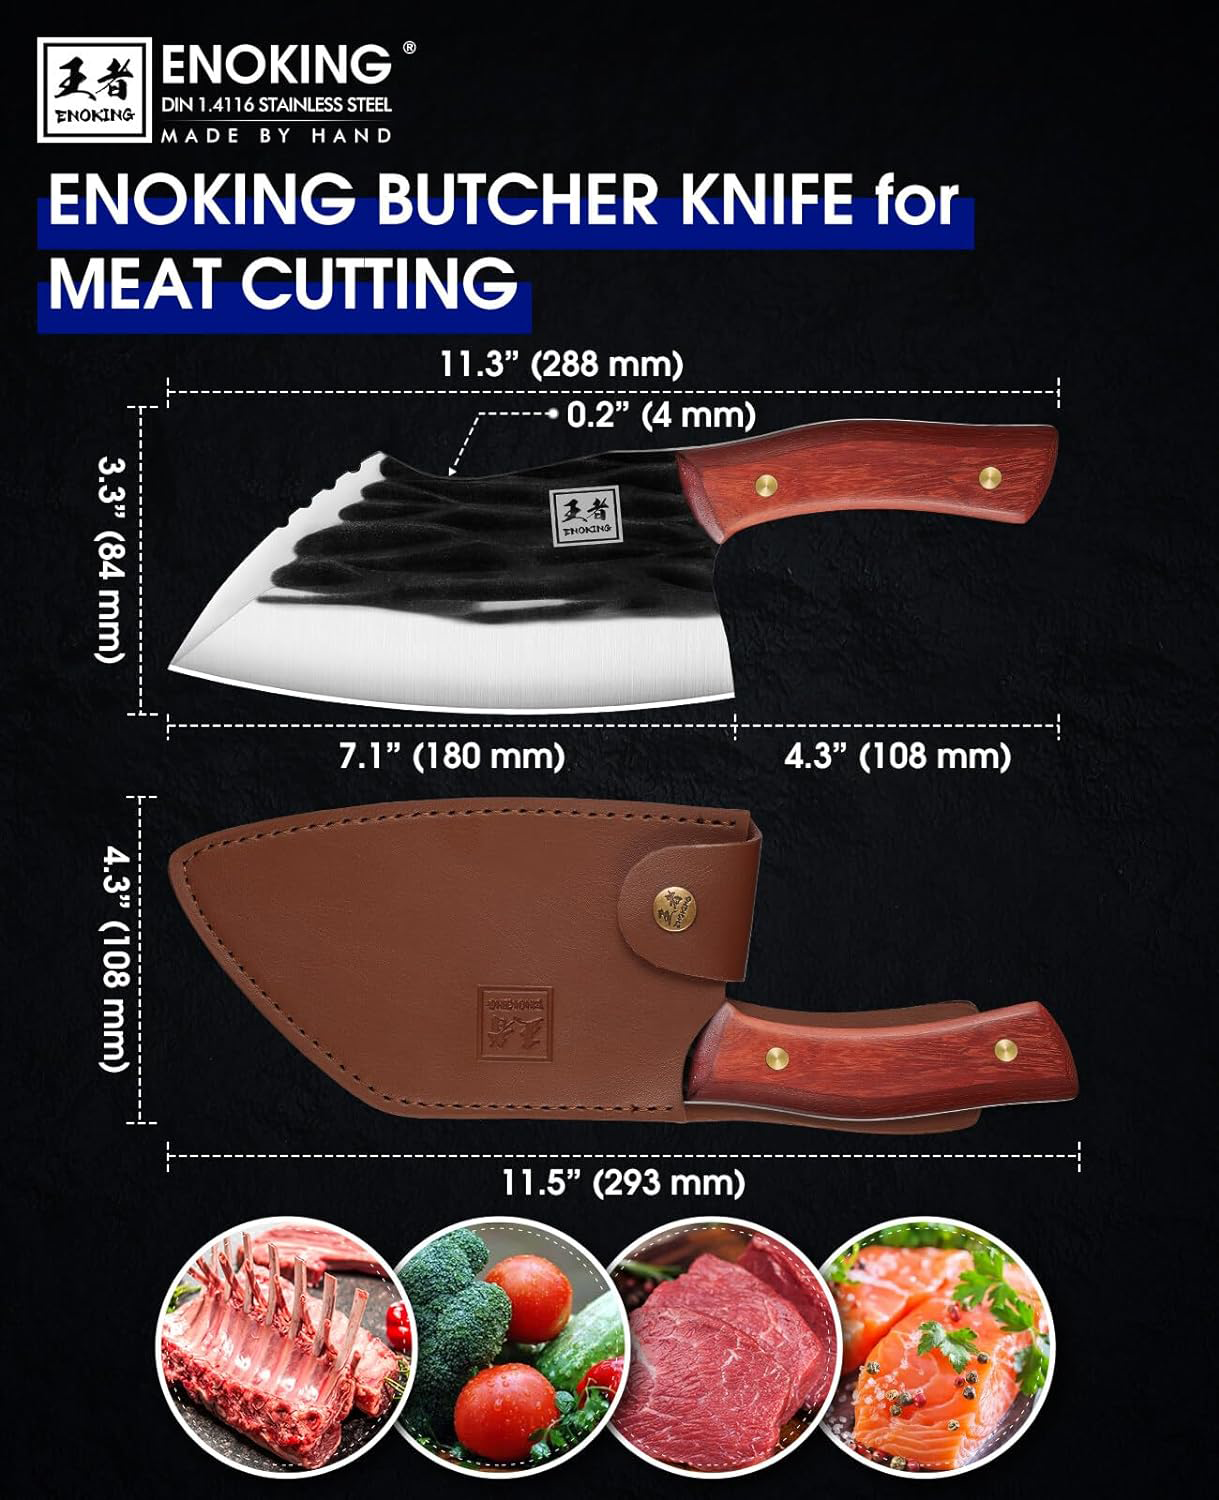 MEAT! Butcher Knives Set with Stainless Steel Blades and Slip-Resistant  Handles for Meat Processing